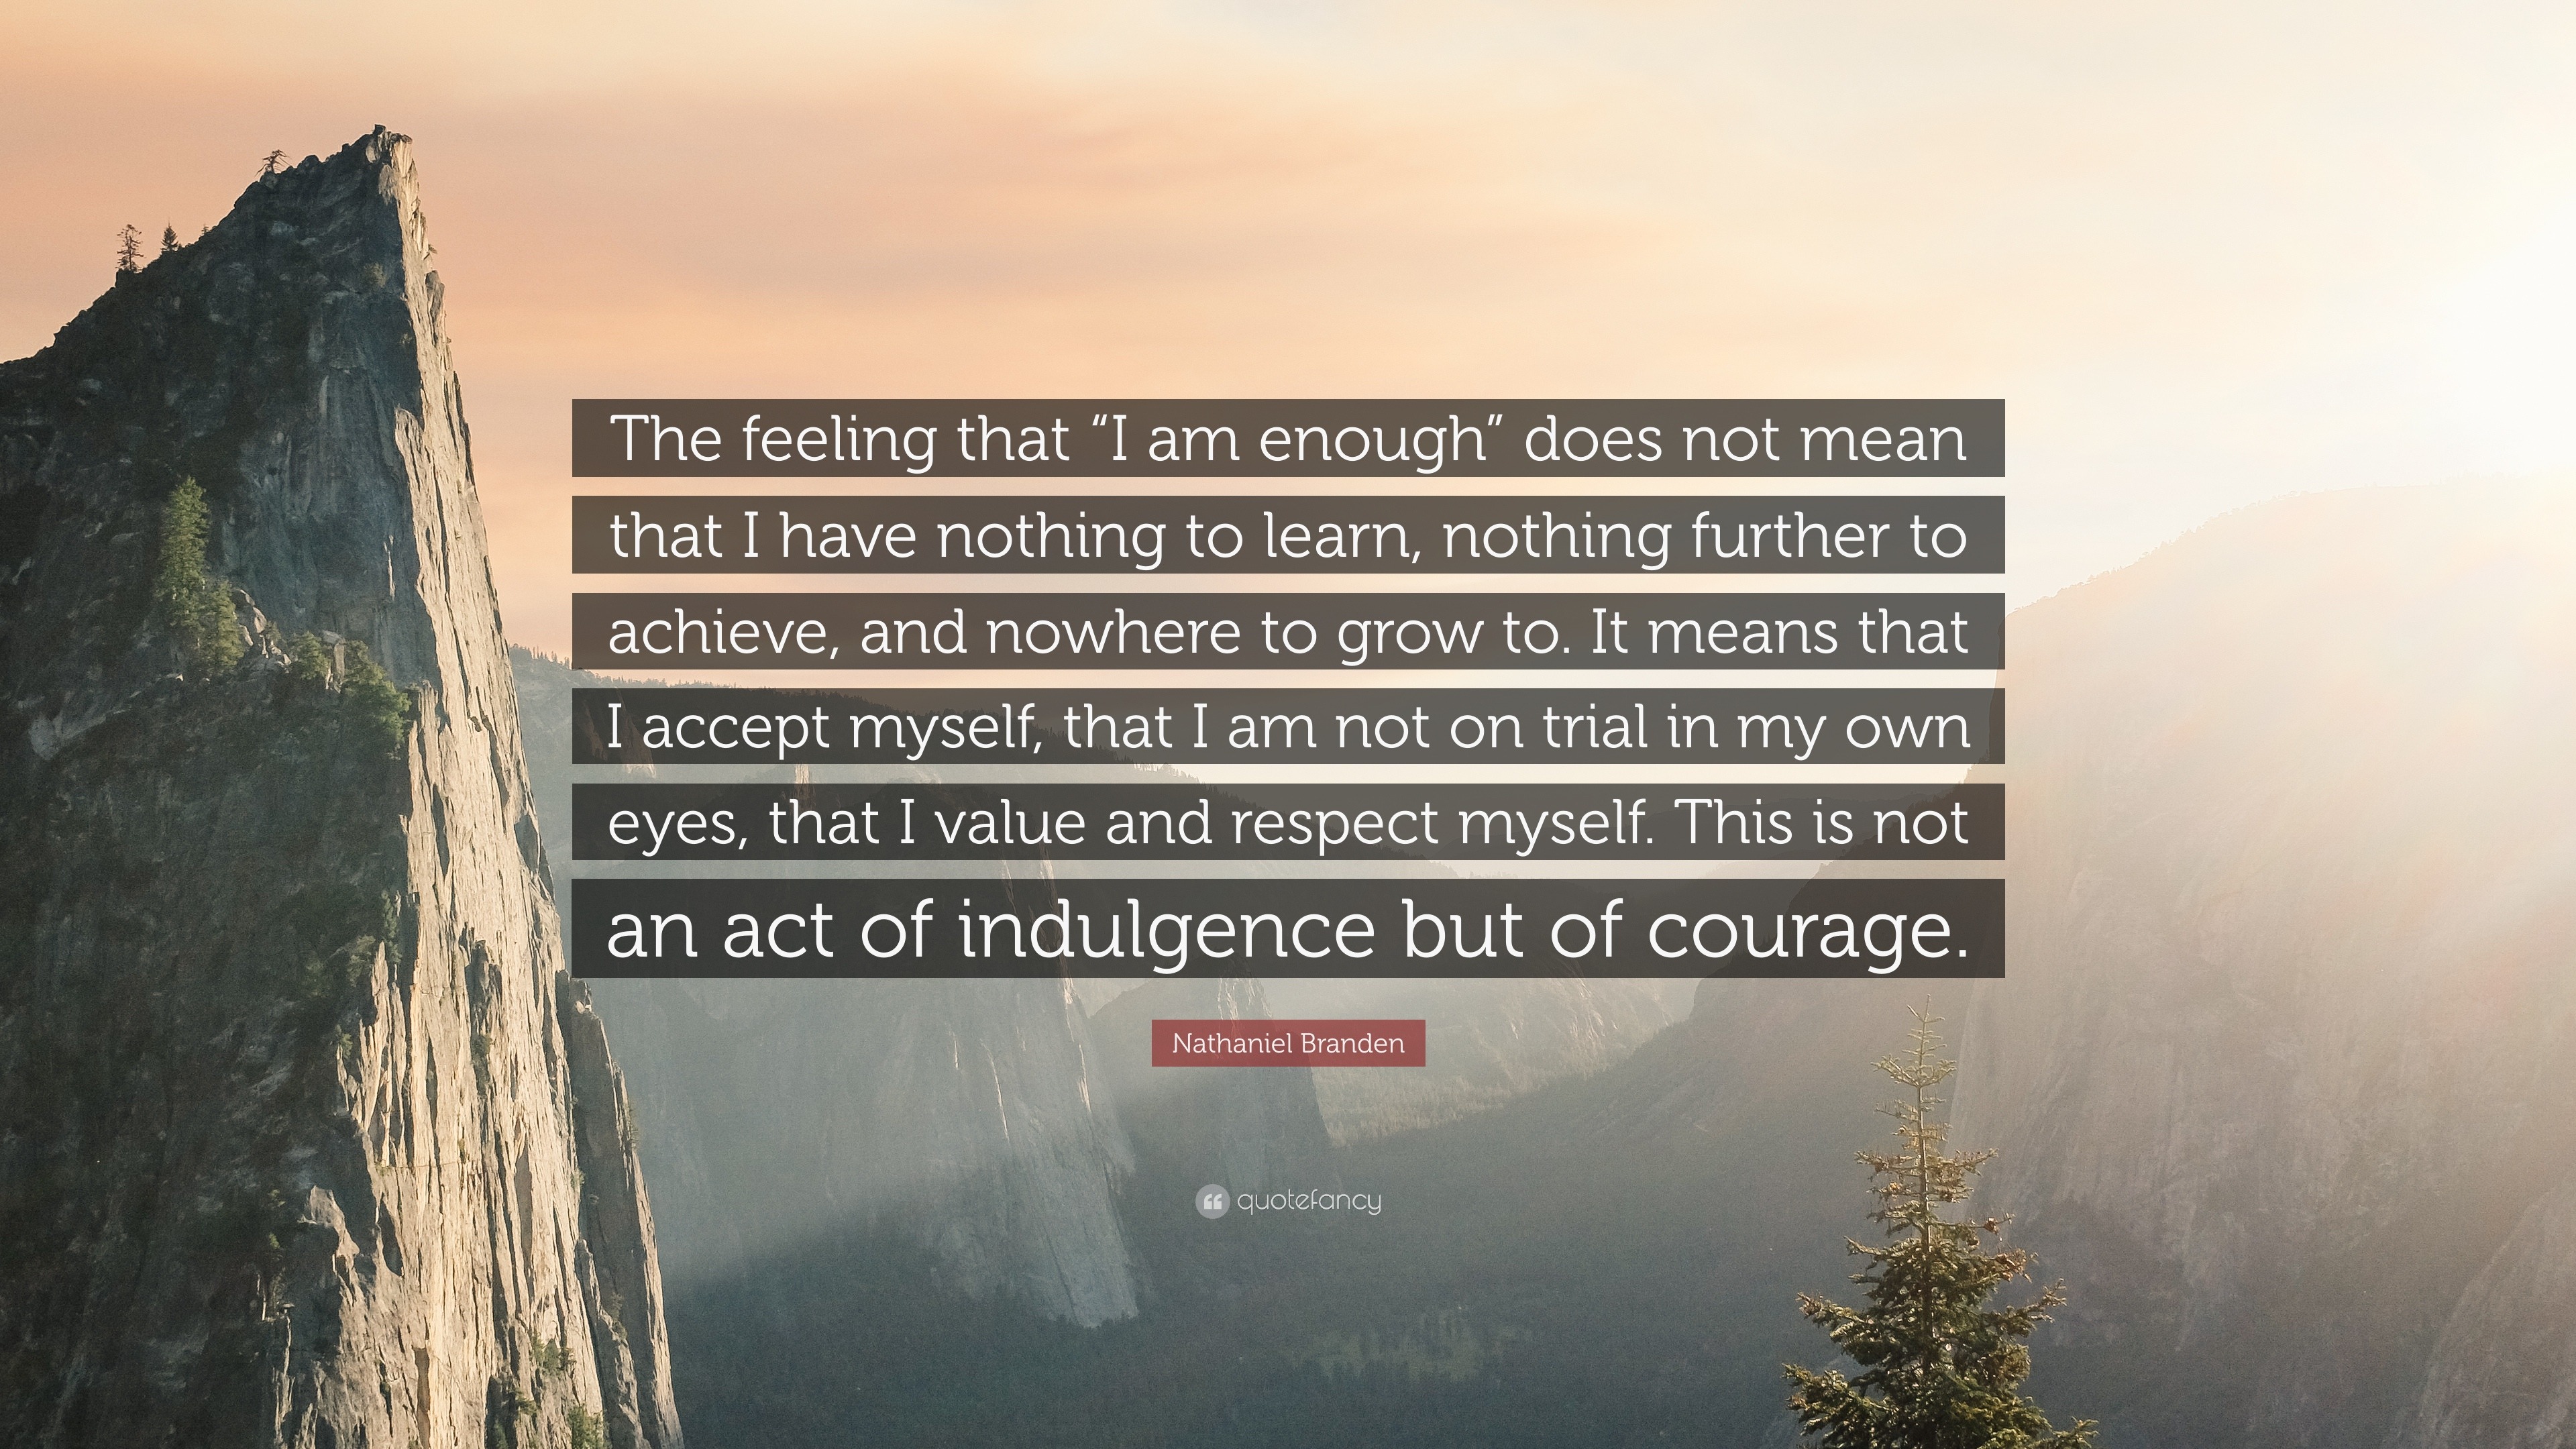 Nathaniel Branden Quote: “The feeling that “I am enough” does not mean that  I have nothing to learn, nothing further to achieve, and nowhere to gr...”